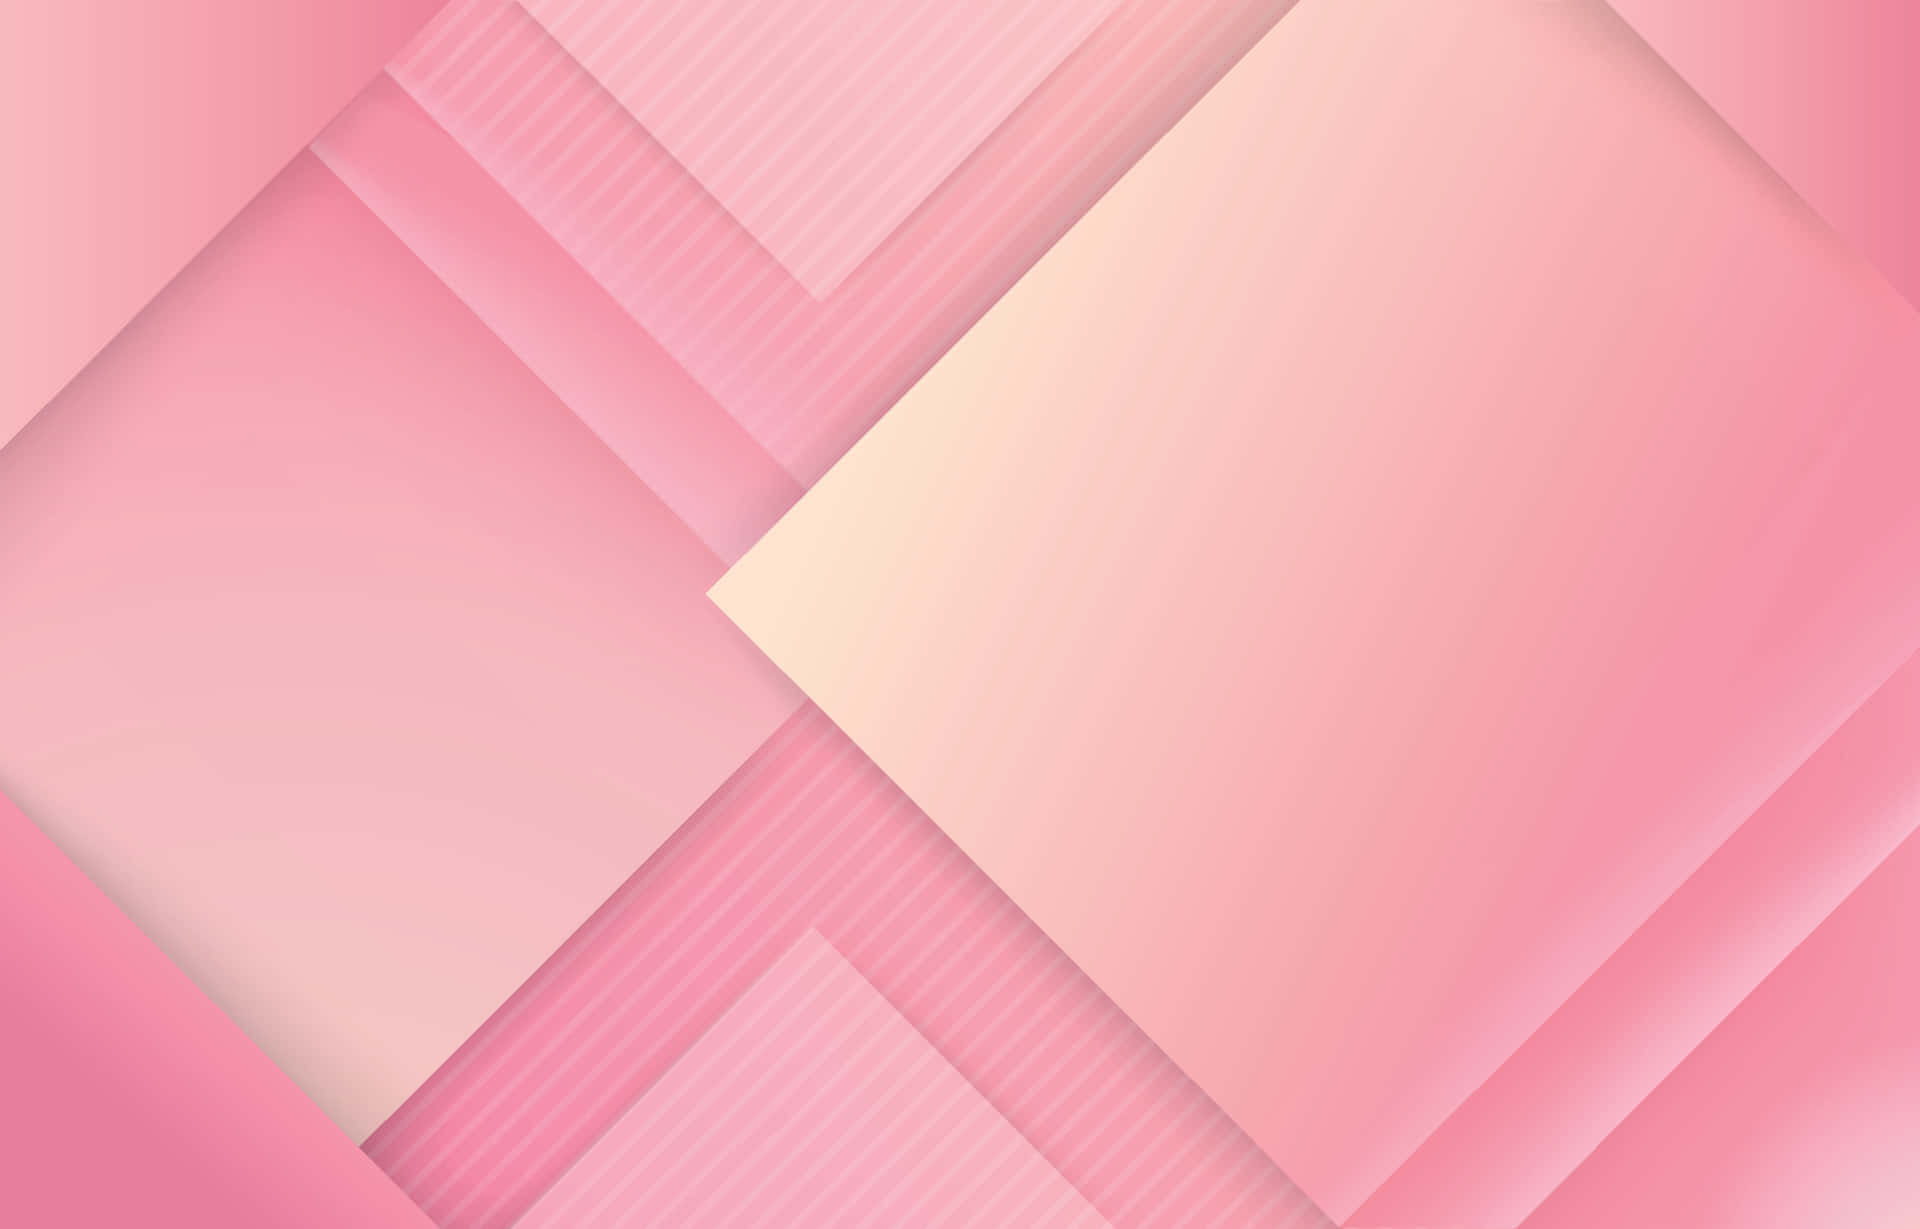 Cute and Stylish Pink Tumblr Theme